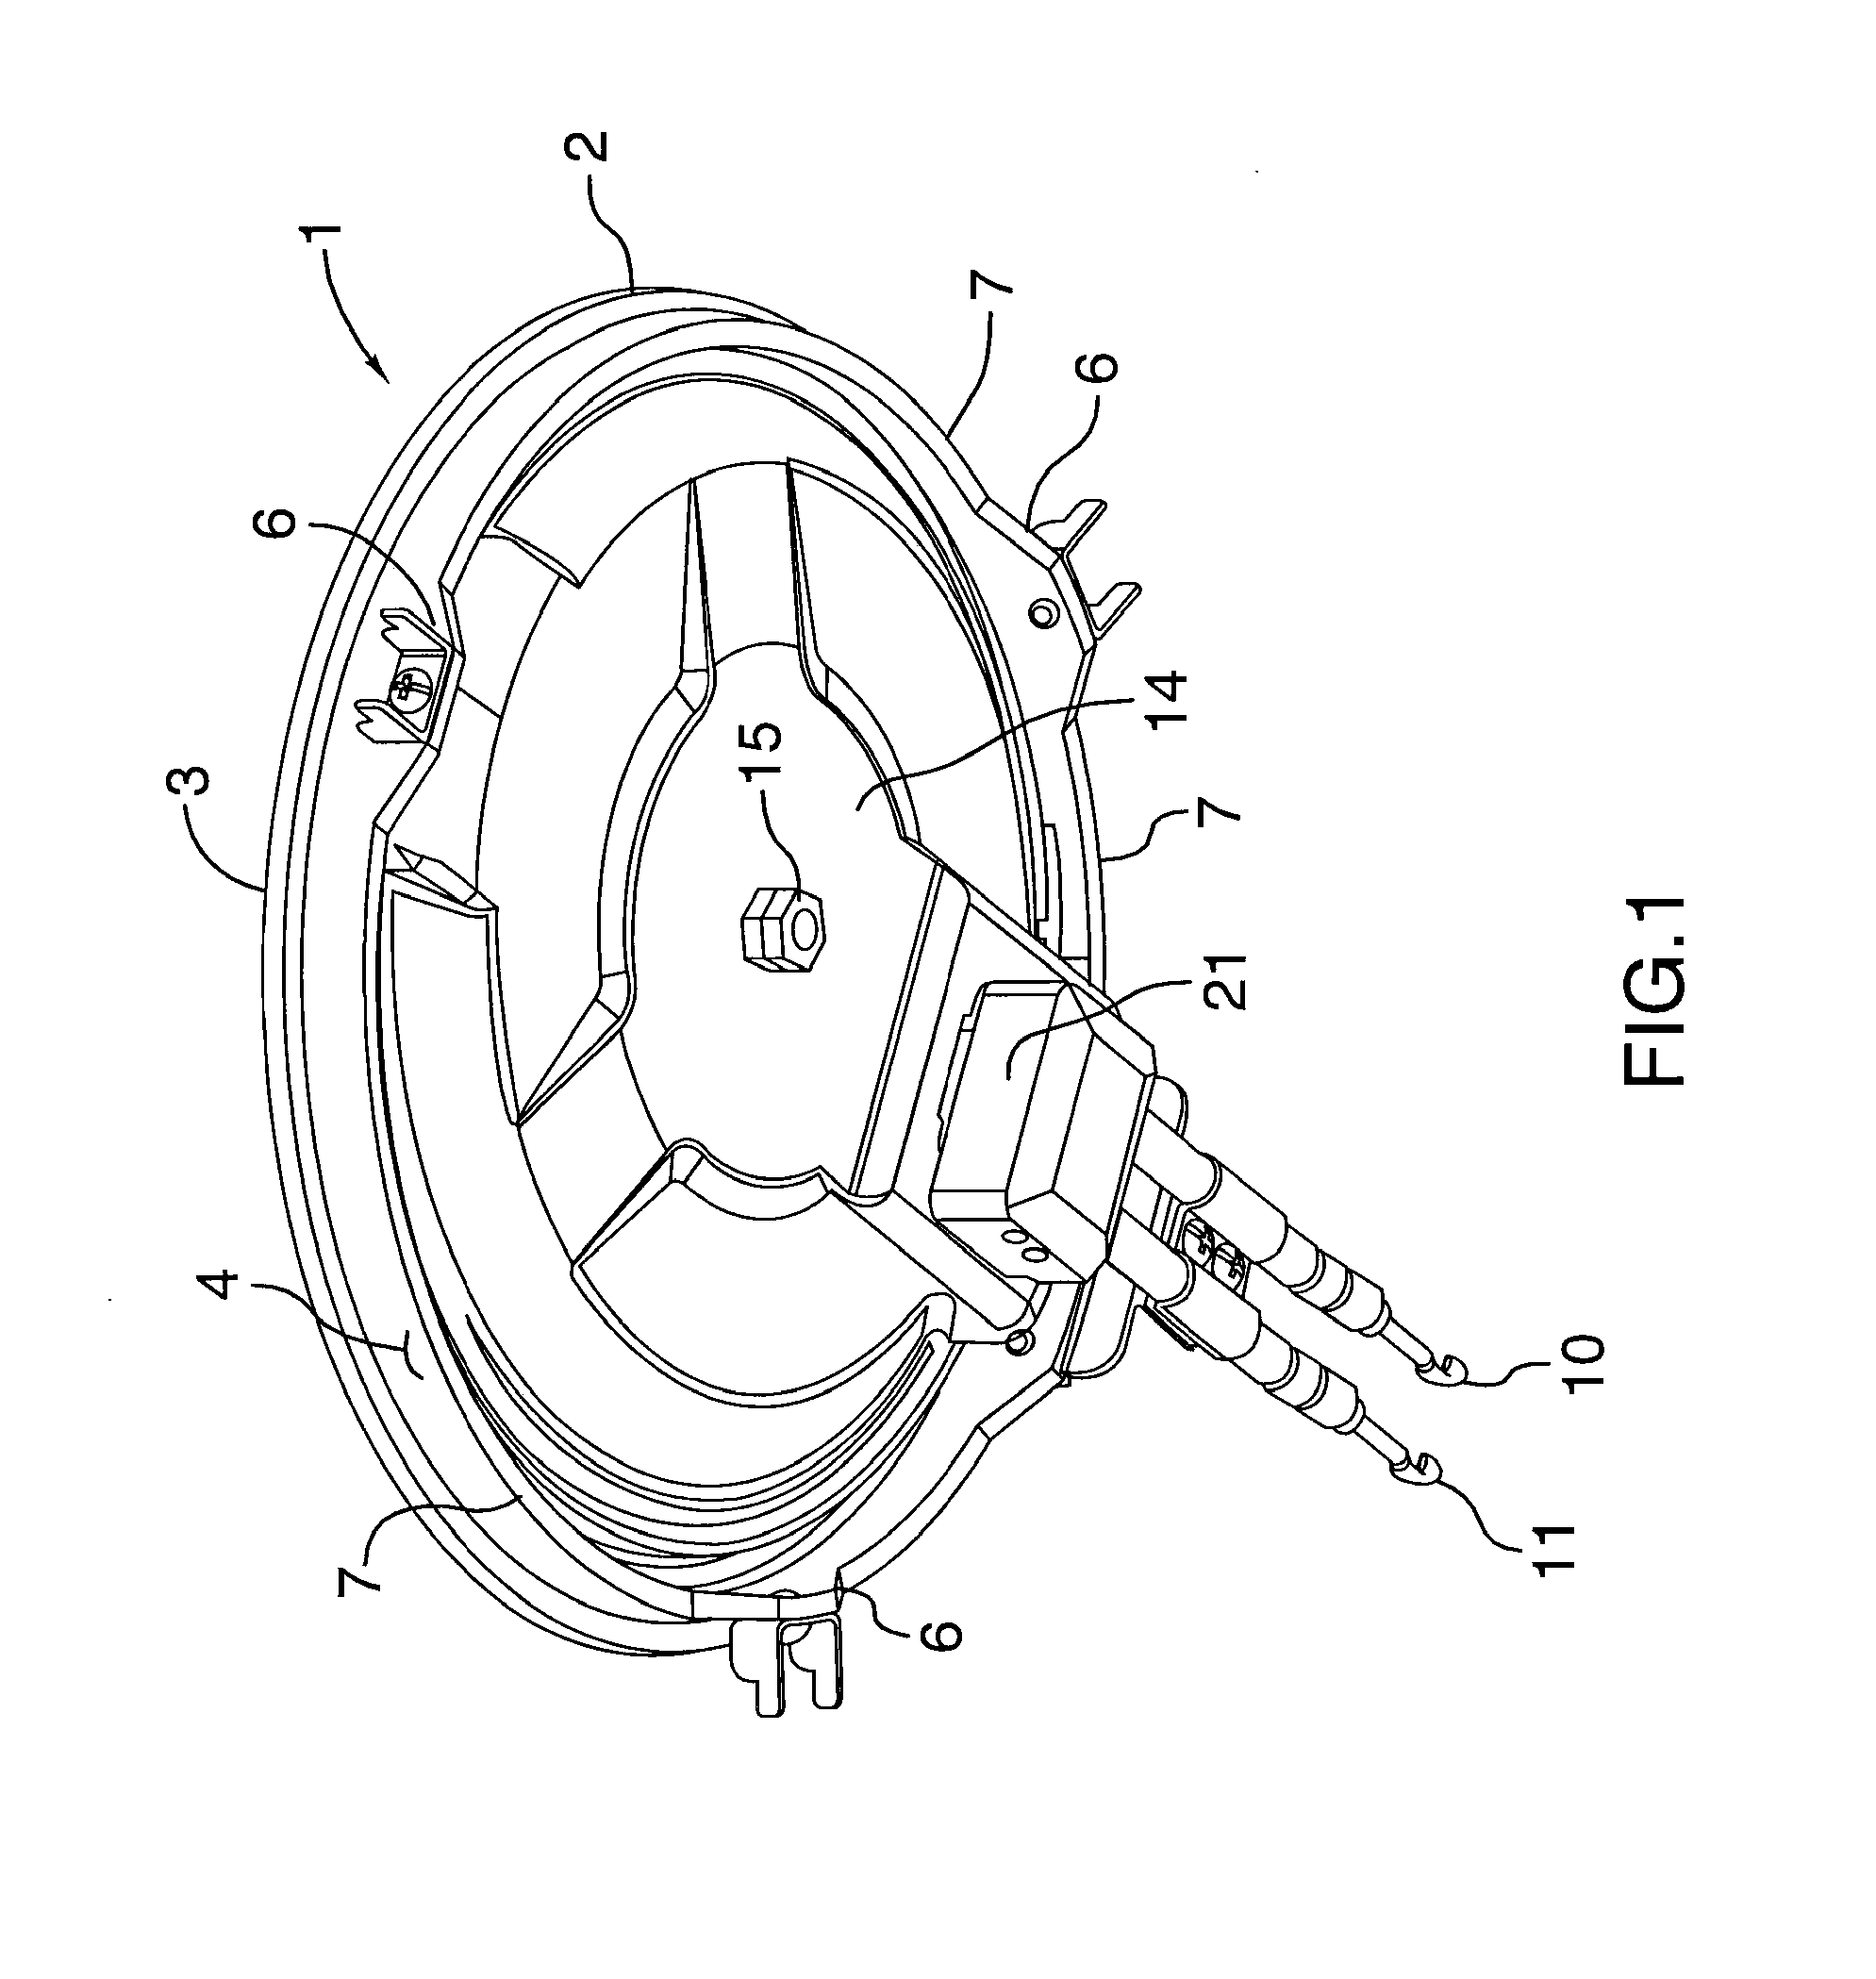 Temperature controlled/limiting heating element for an electric cooking appliance